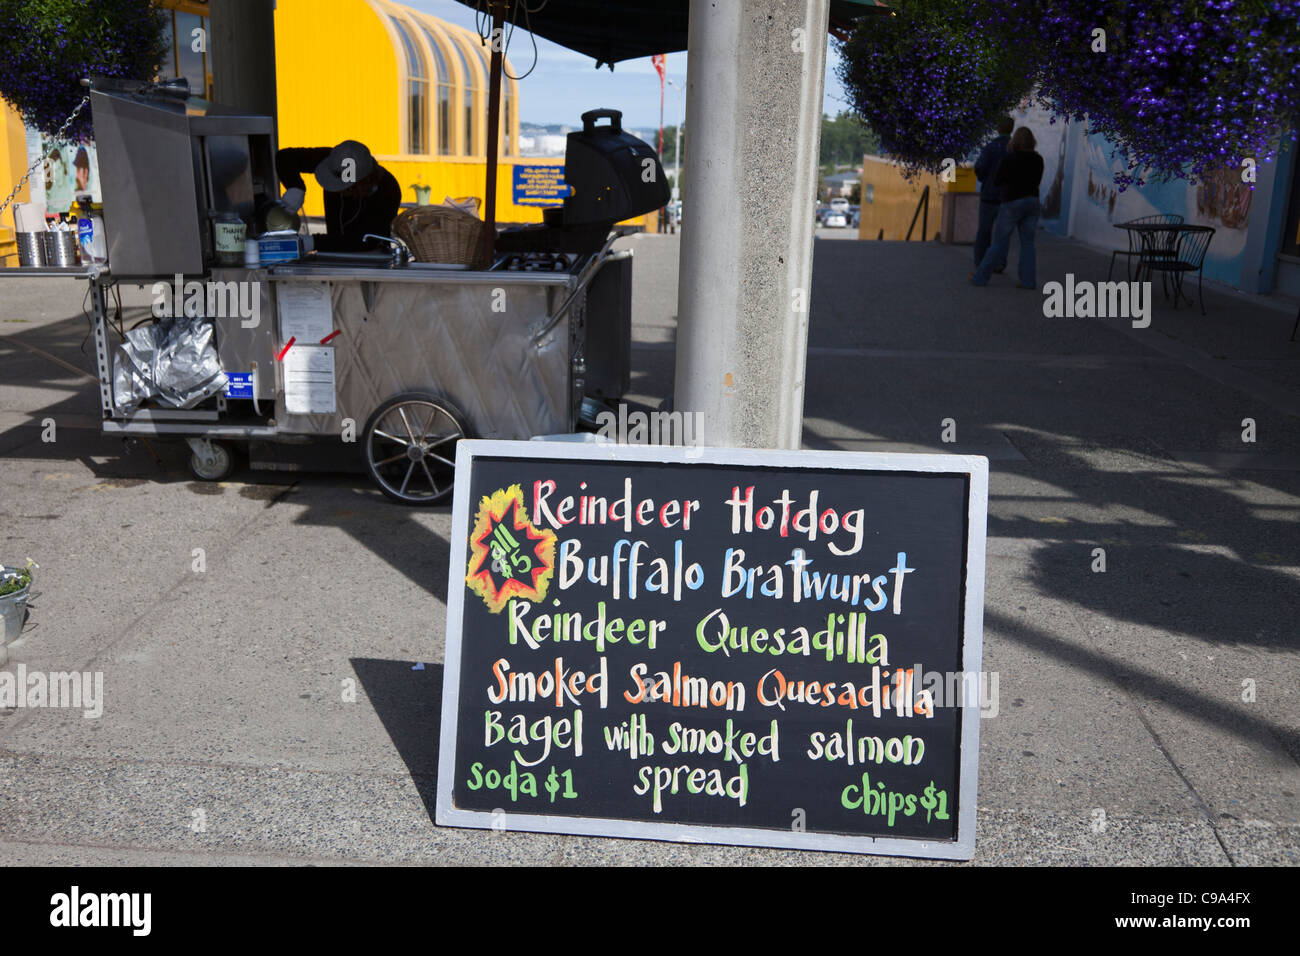 Street food vendor with exotic Alaskan foods in downtown Anchorage, Alaska. Stock Photo